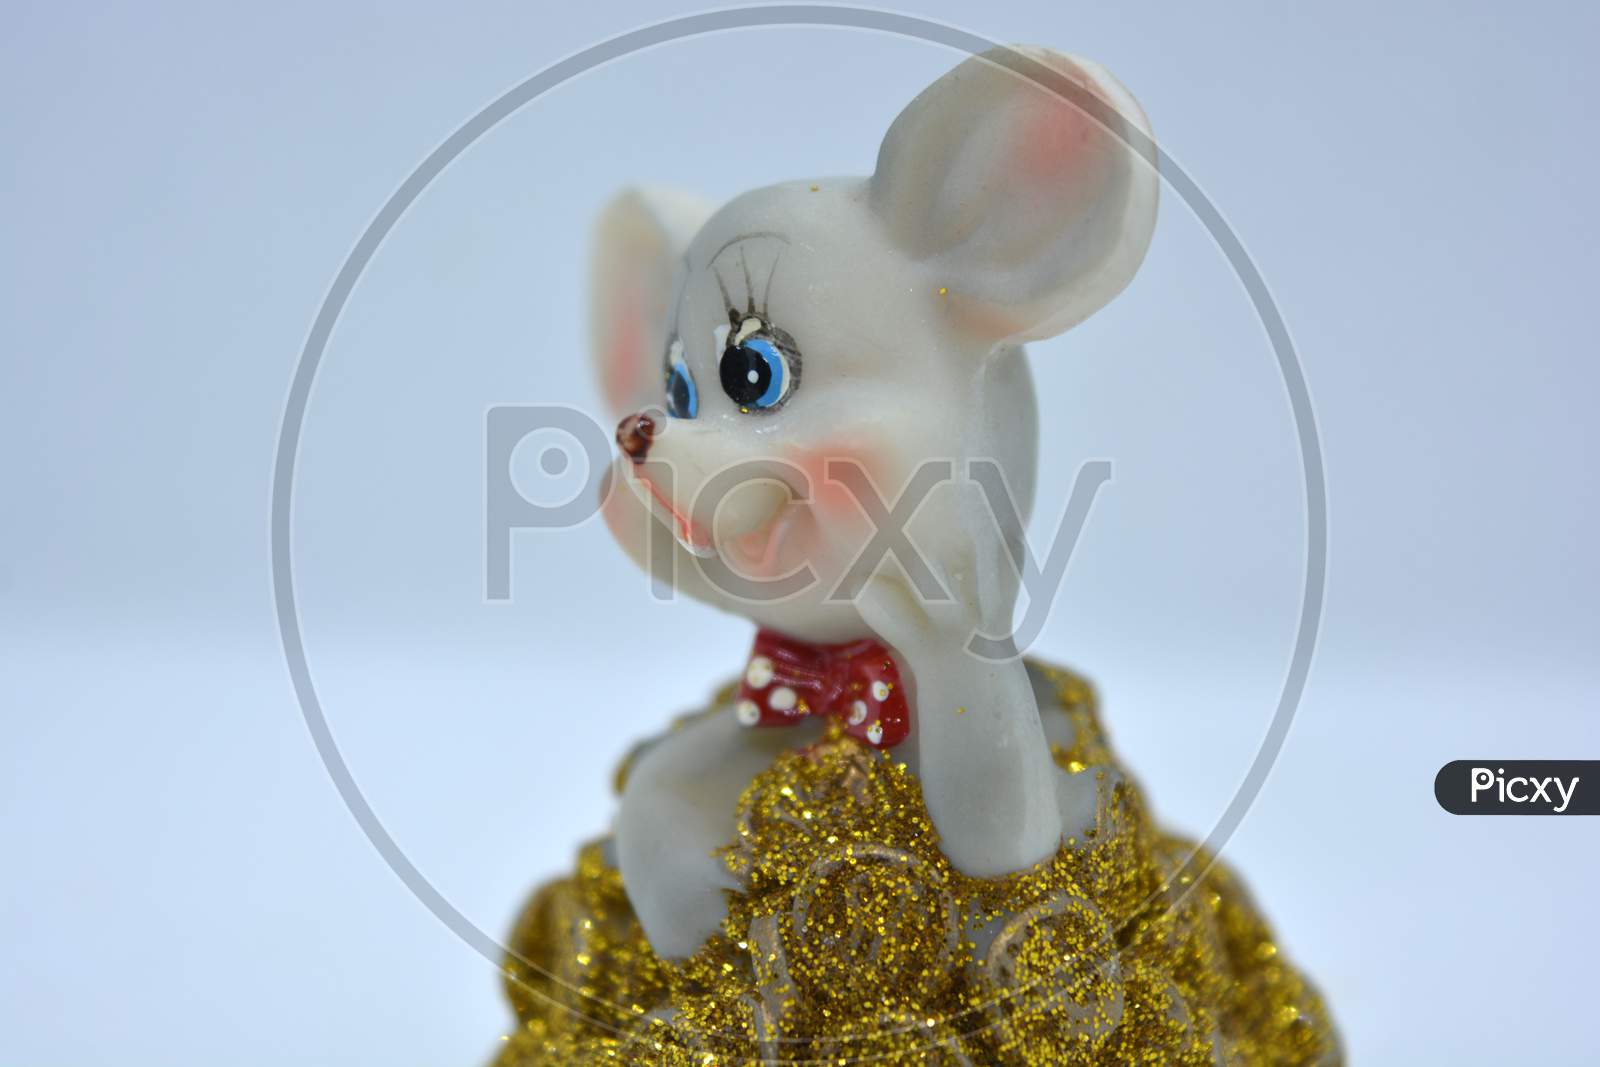 Ceramic statuette of a cute gray mouse with large ears that stands in a pile of brassing gold coins.